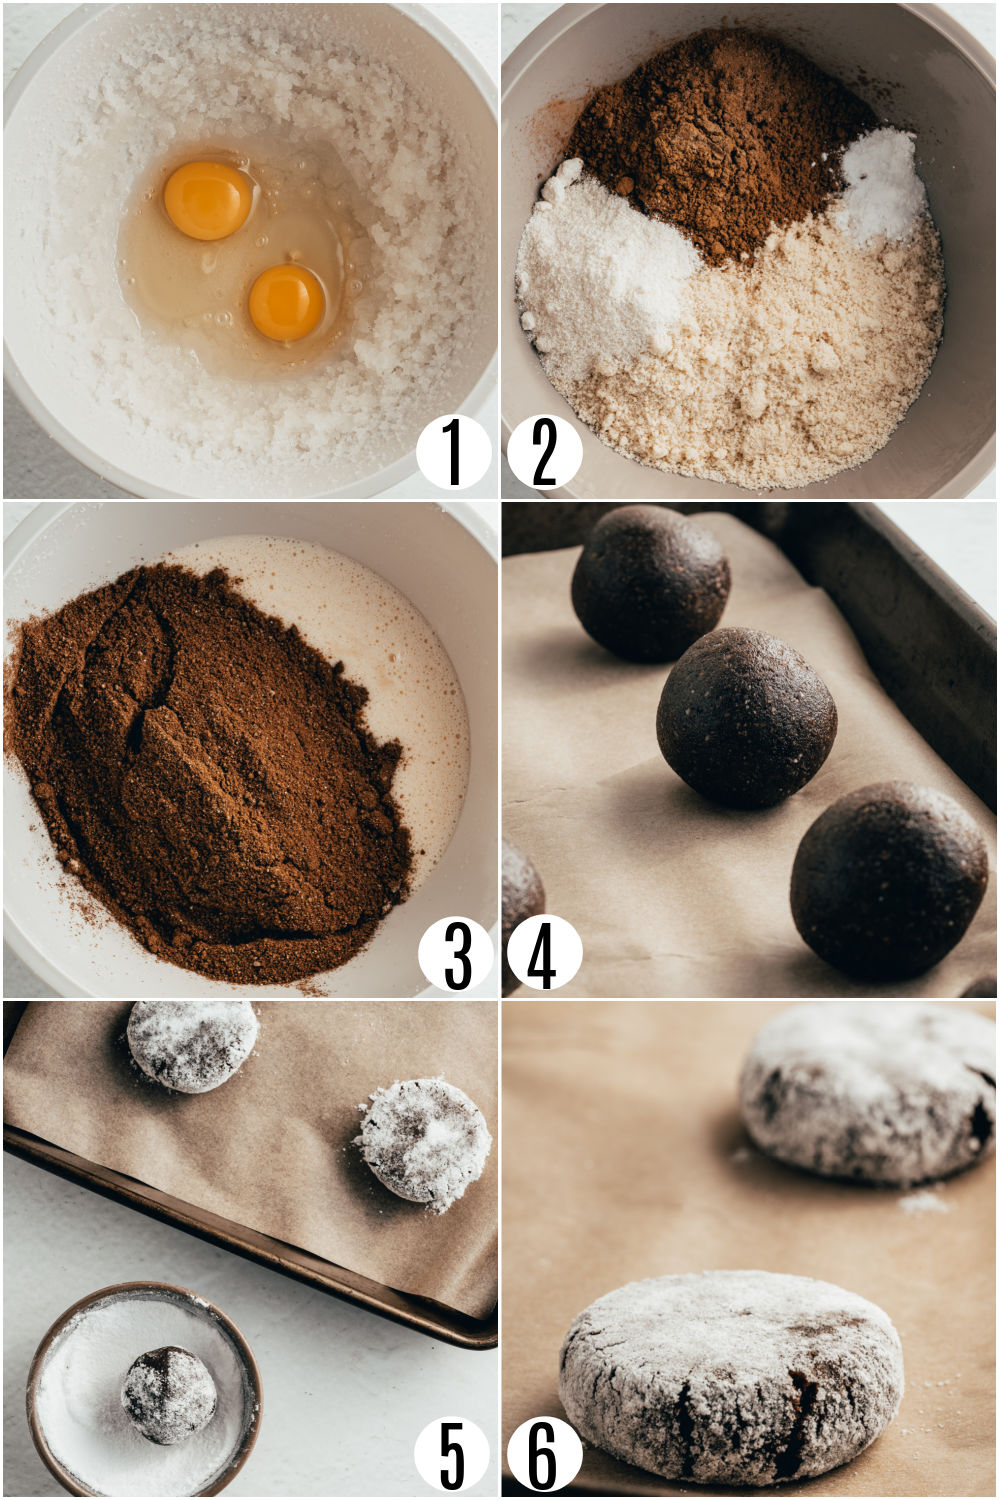 Step by step photos showing how to make chocolate crinkle cookies.